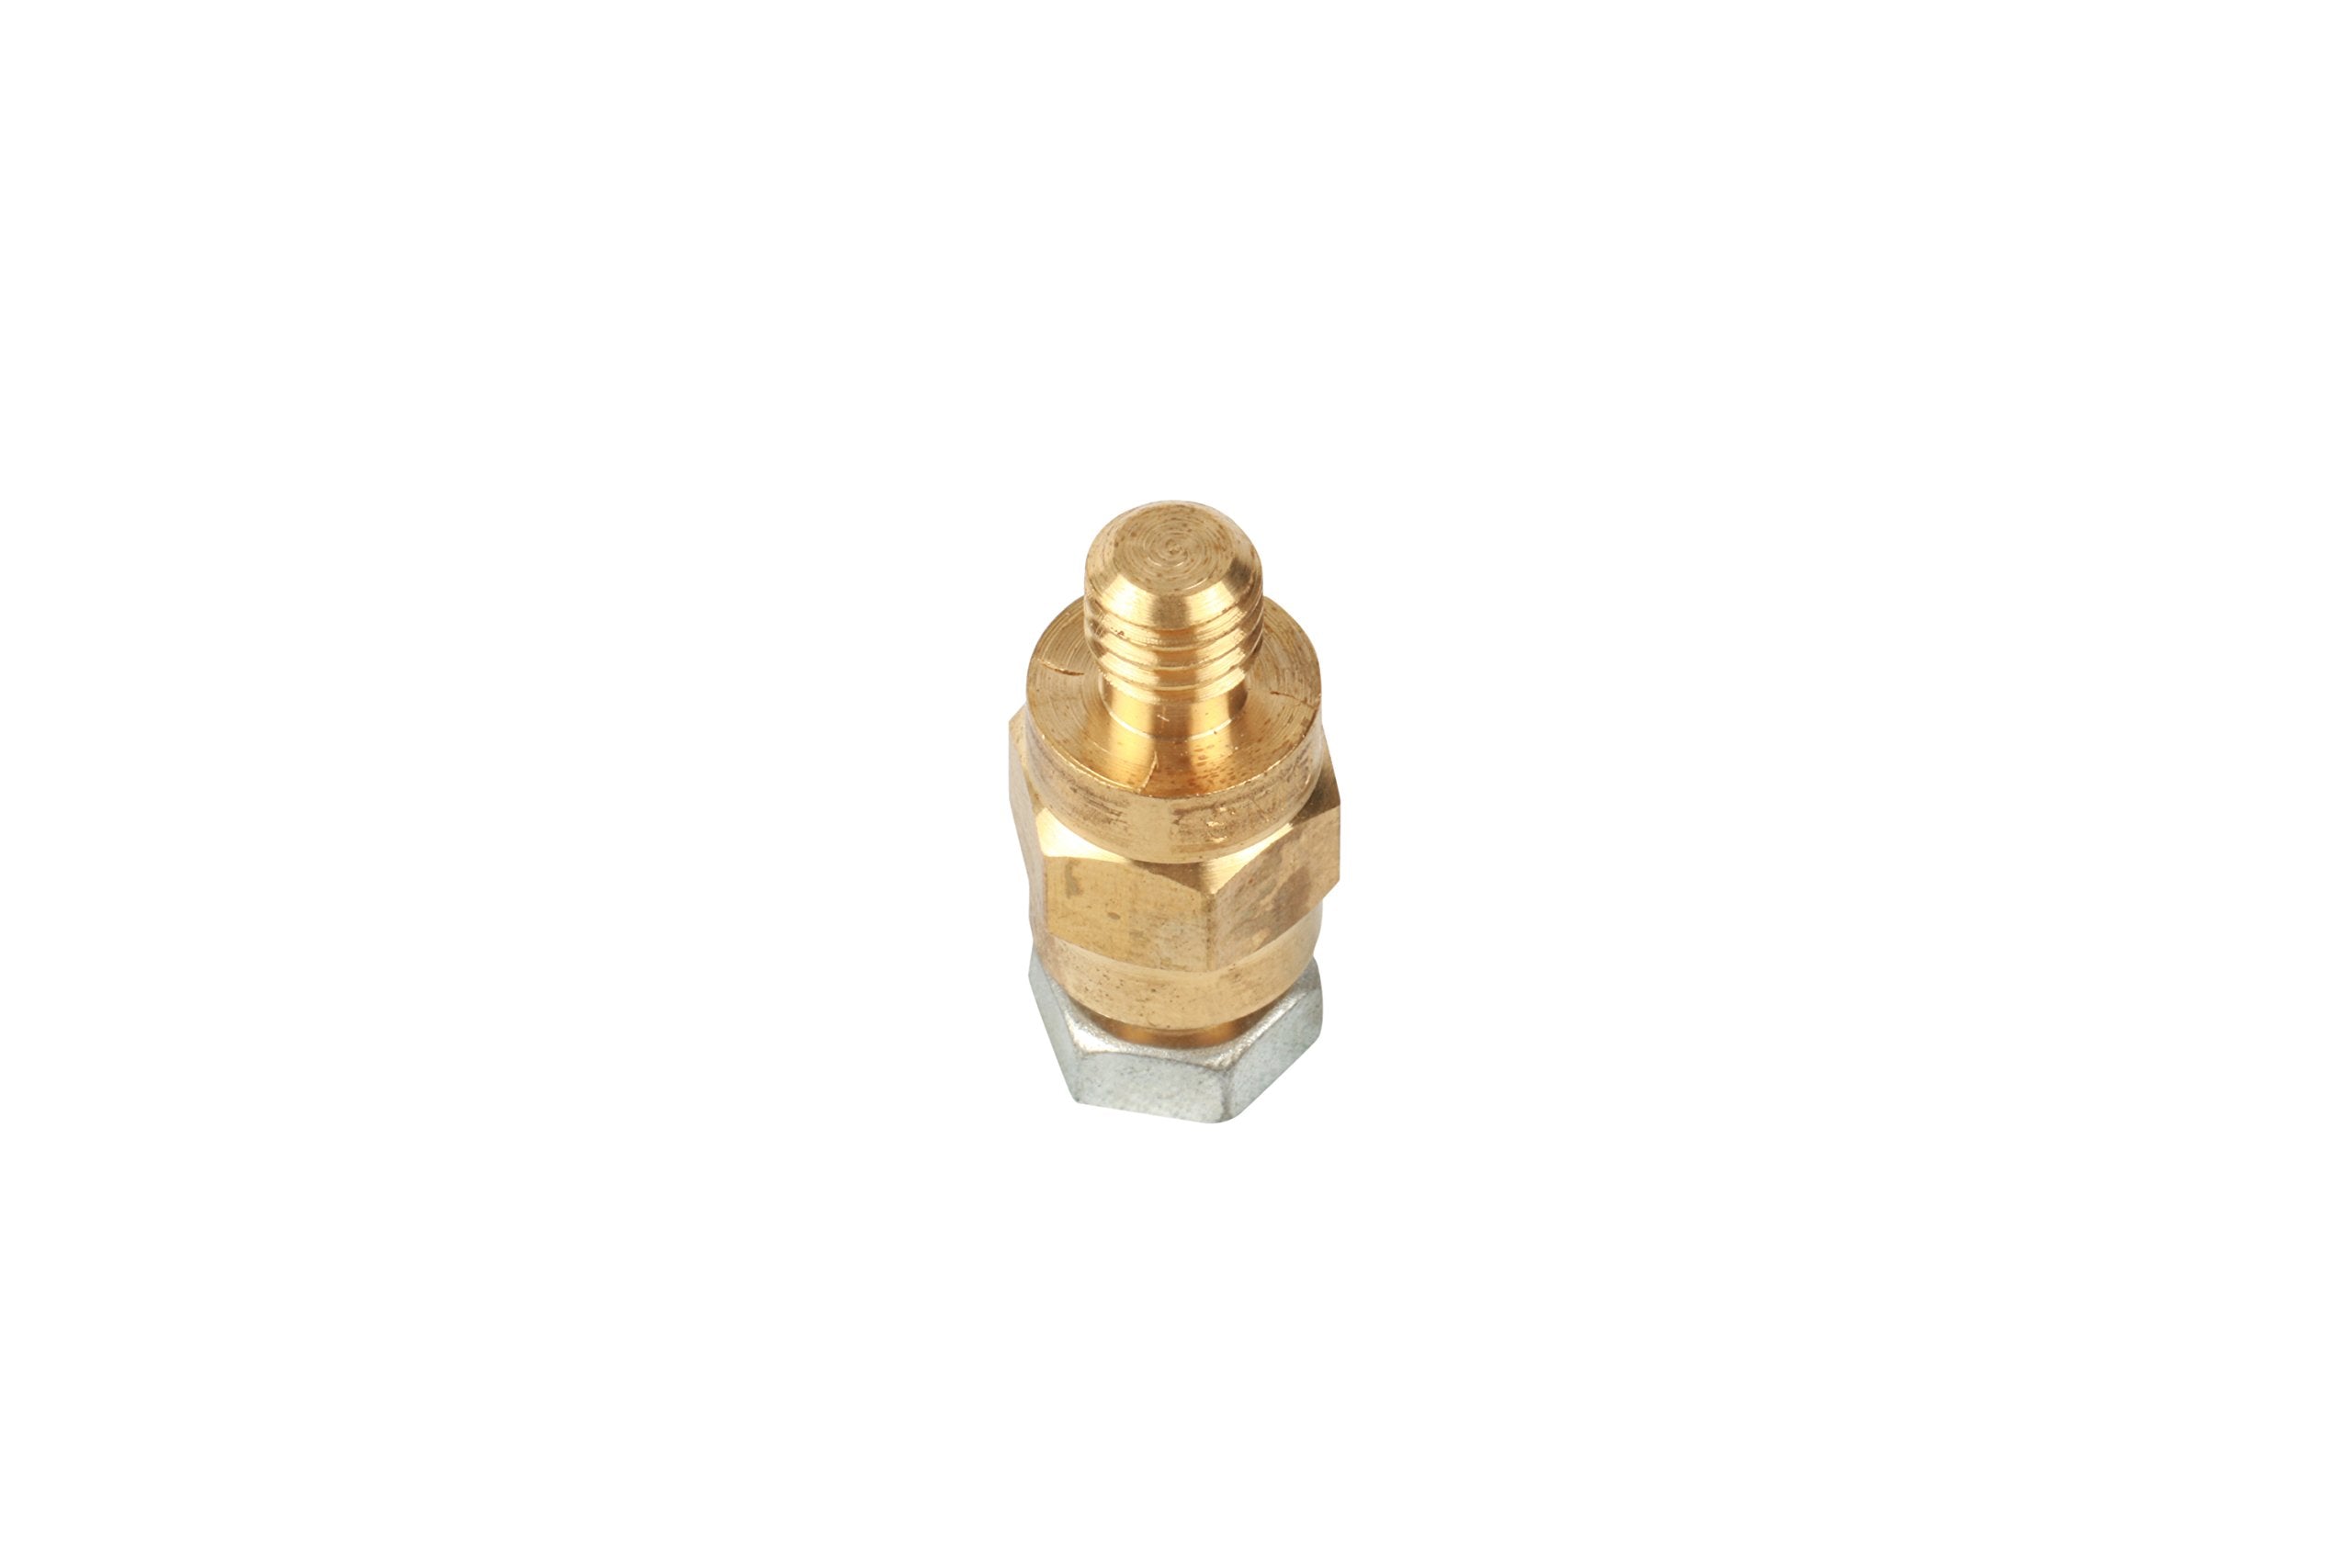 WirthCo 30300 Battery Doctor Standard Side Terminal Bolt